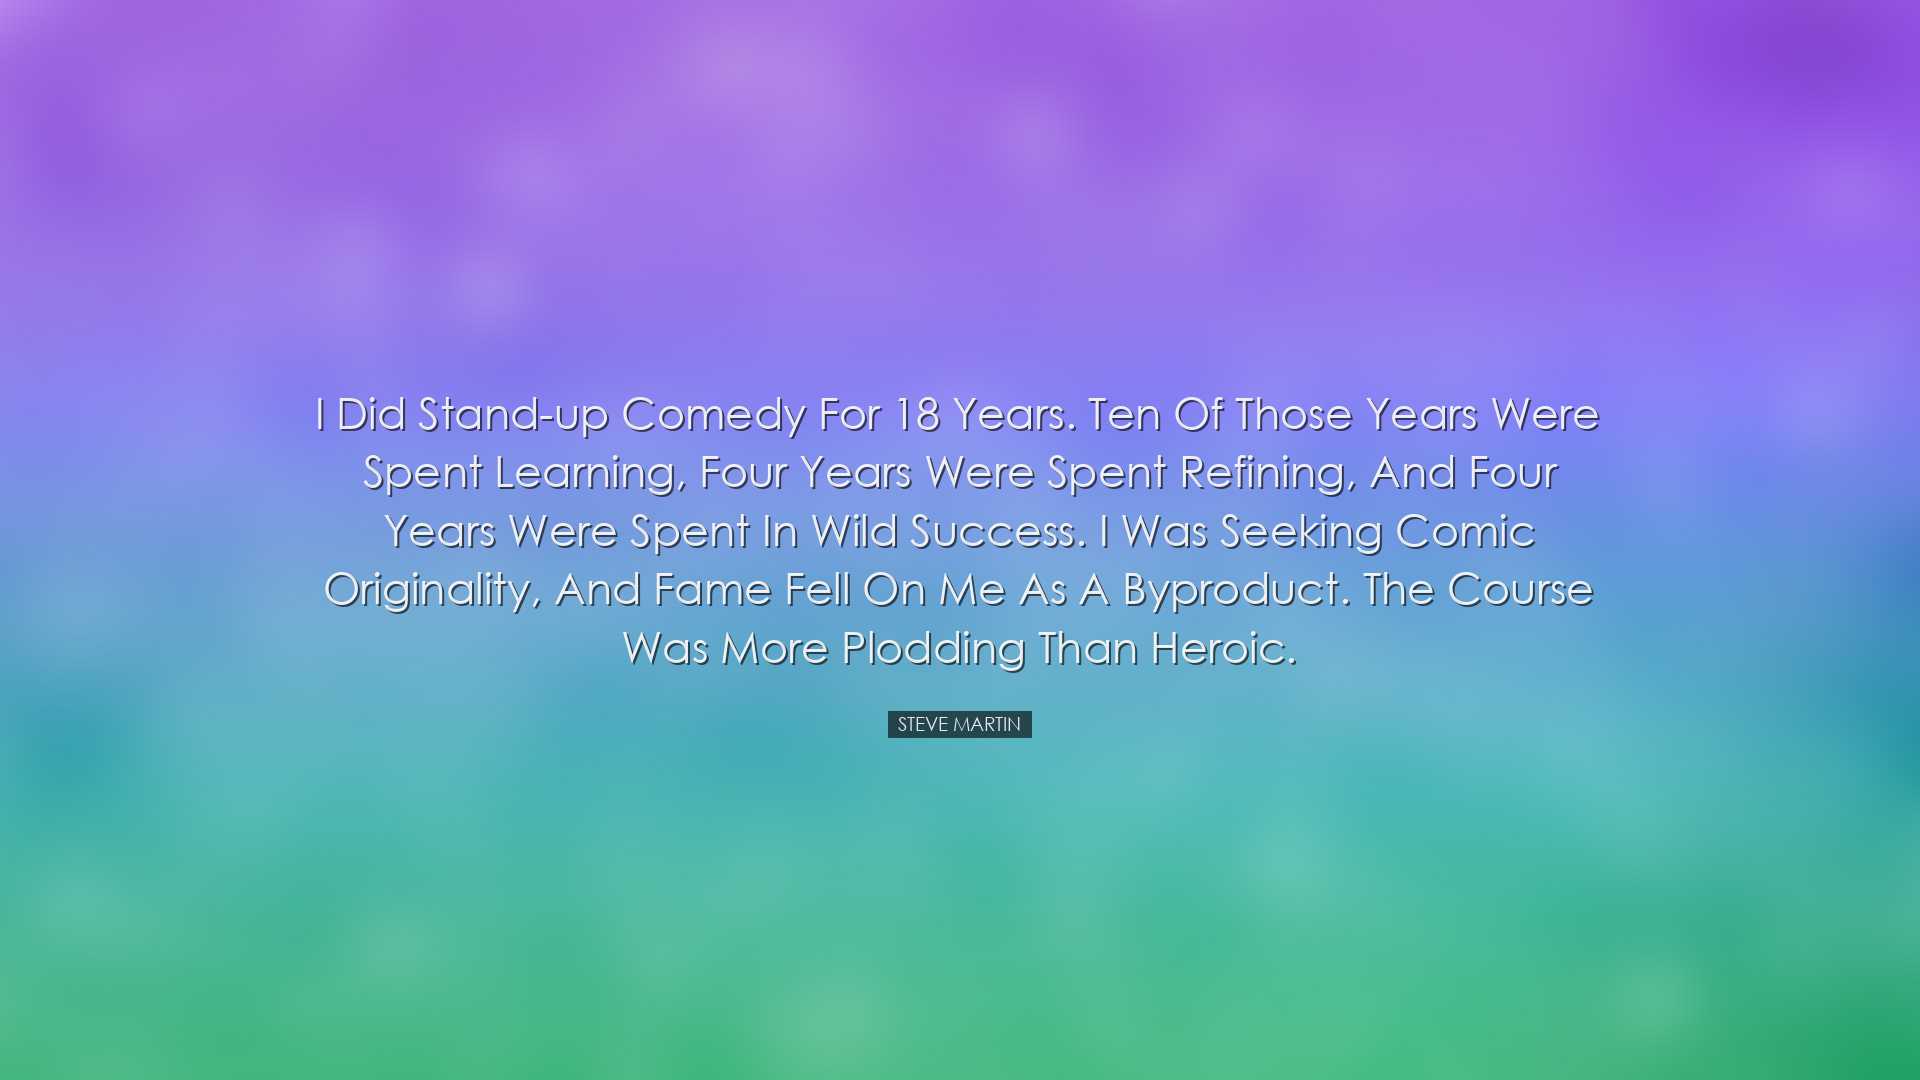 I did stand-up comedy for 18 years. Ten of those years were spent